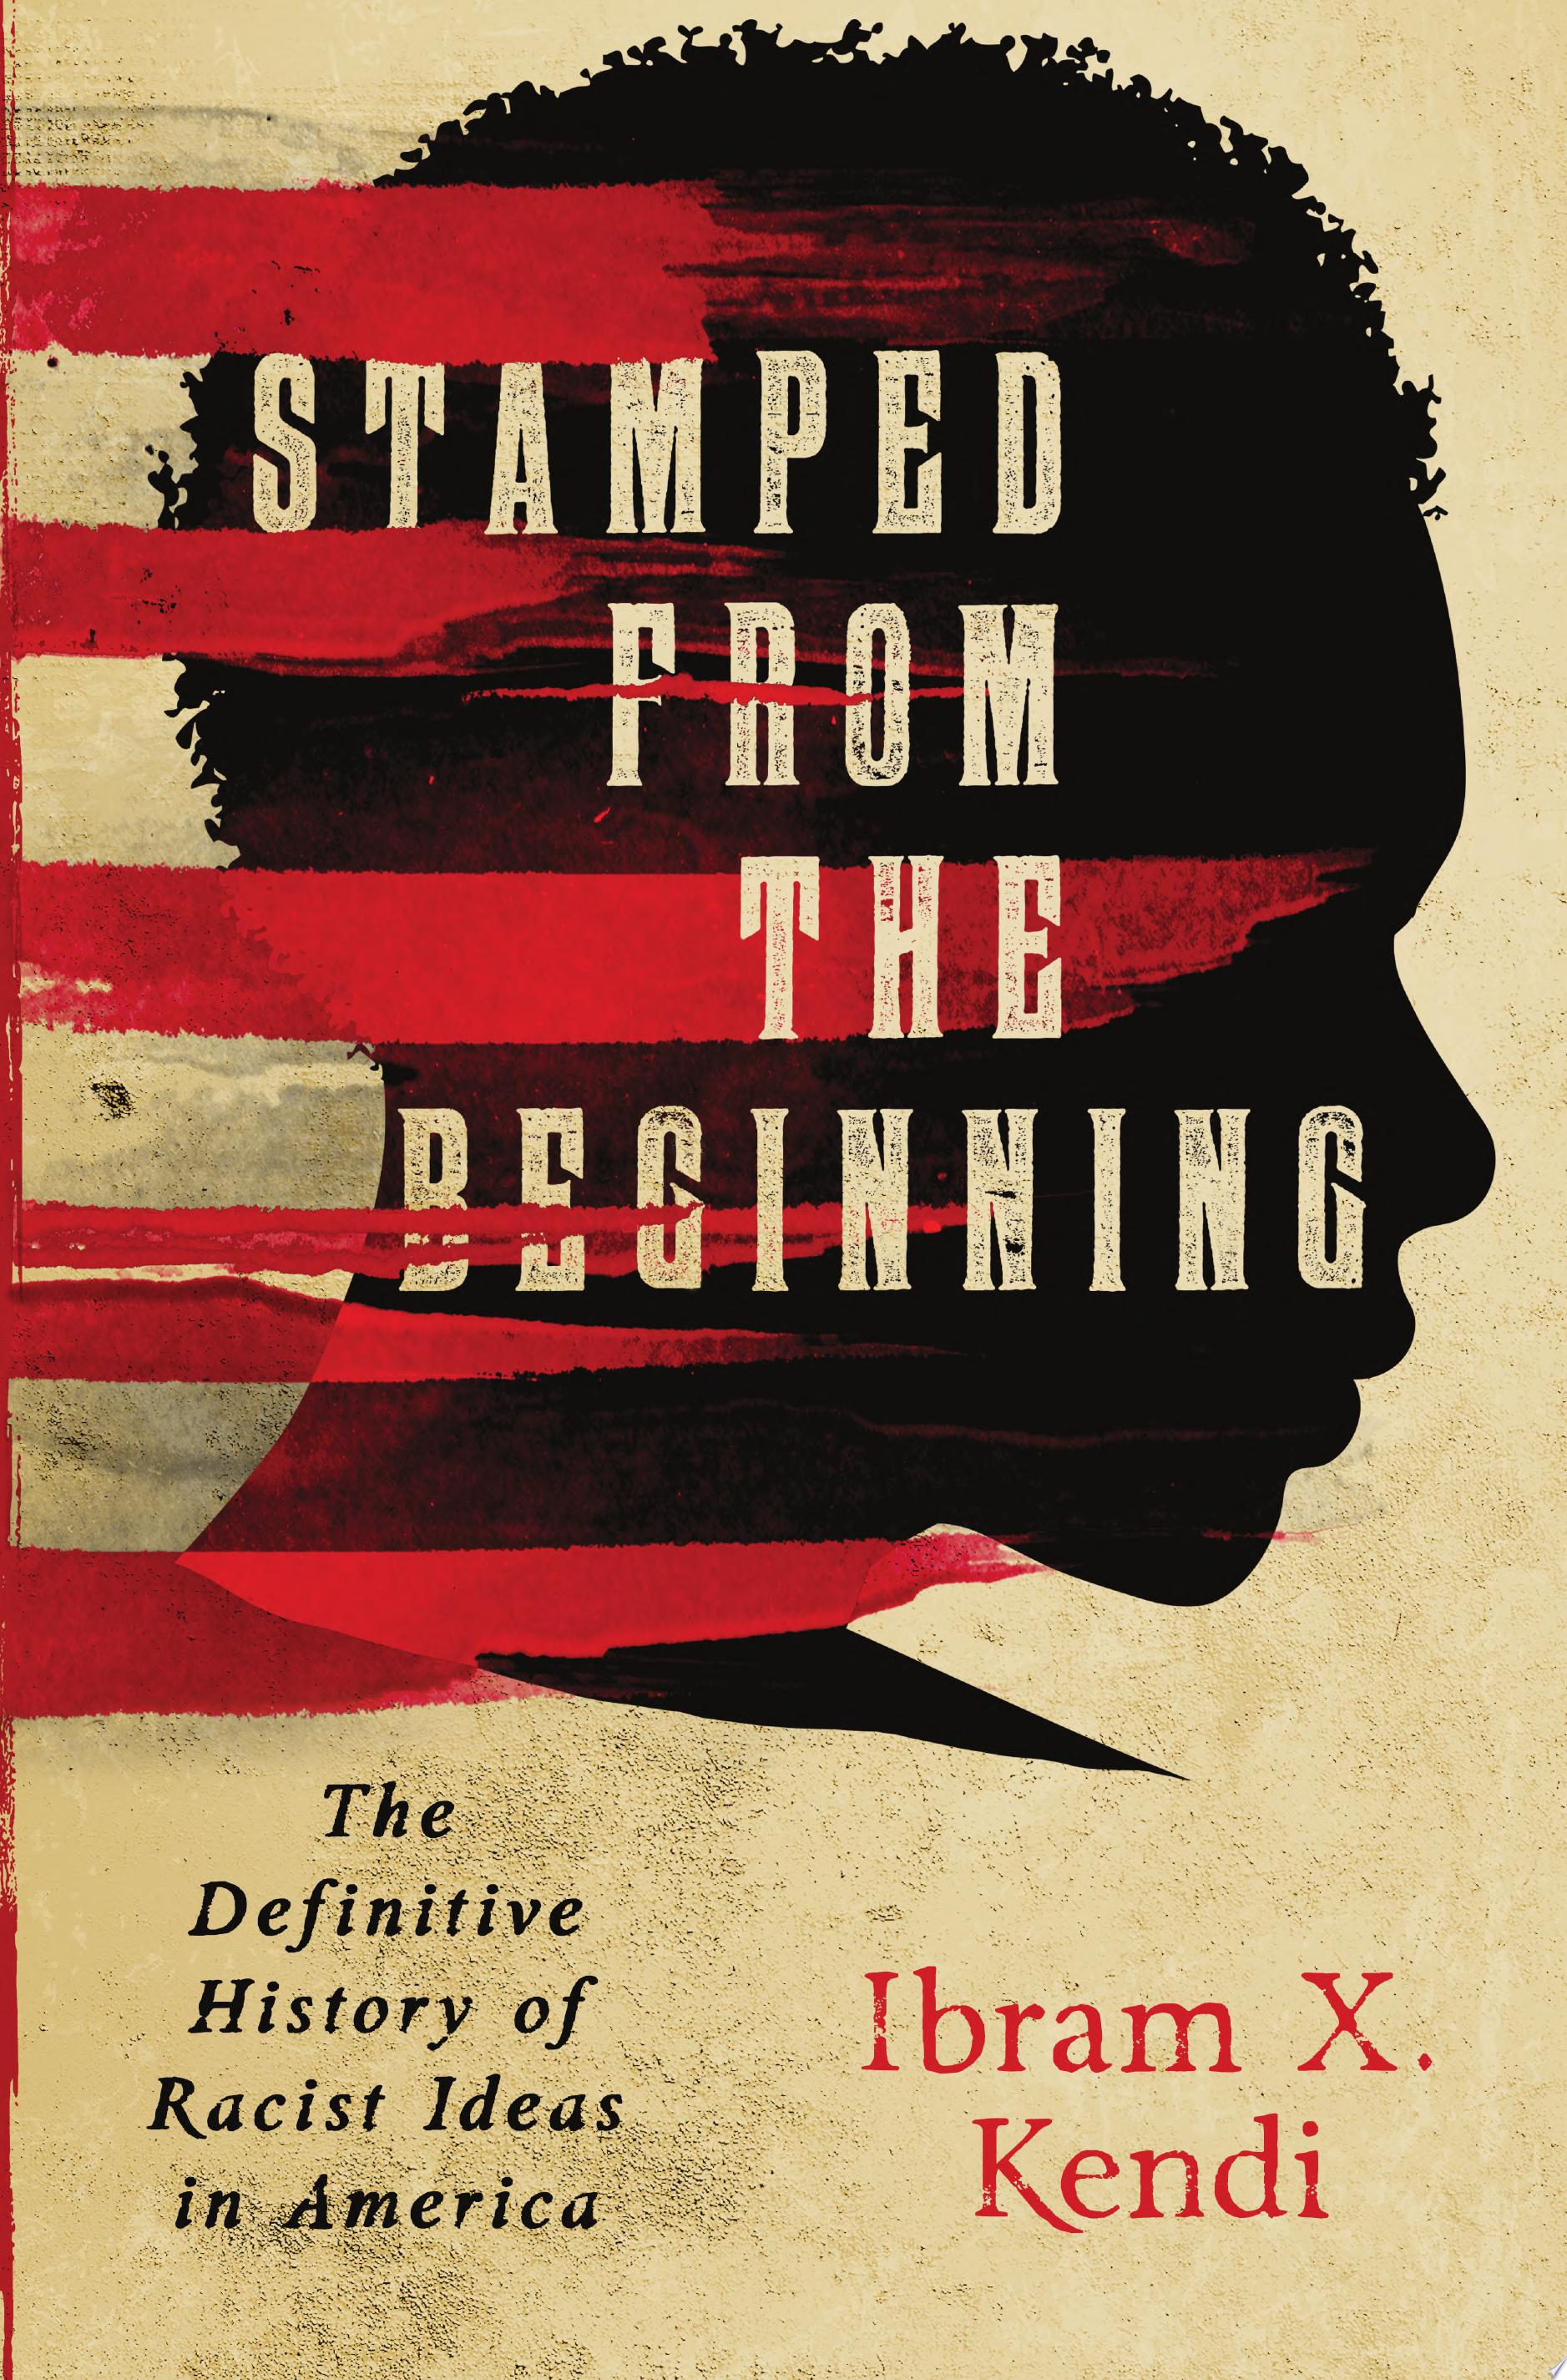 Image for "Stamped from the Beginning"